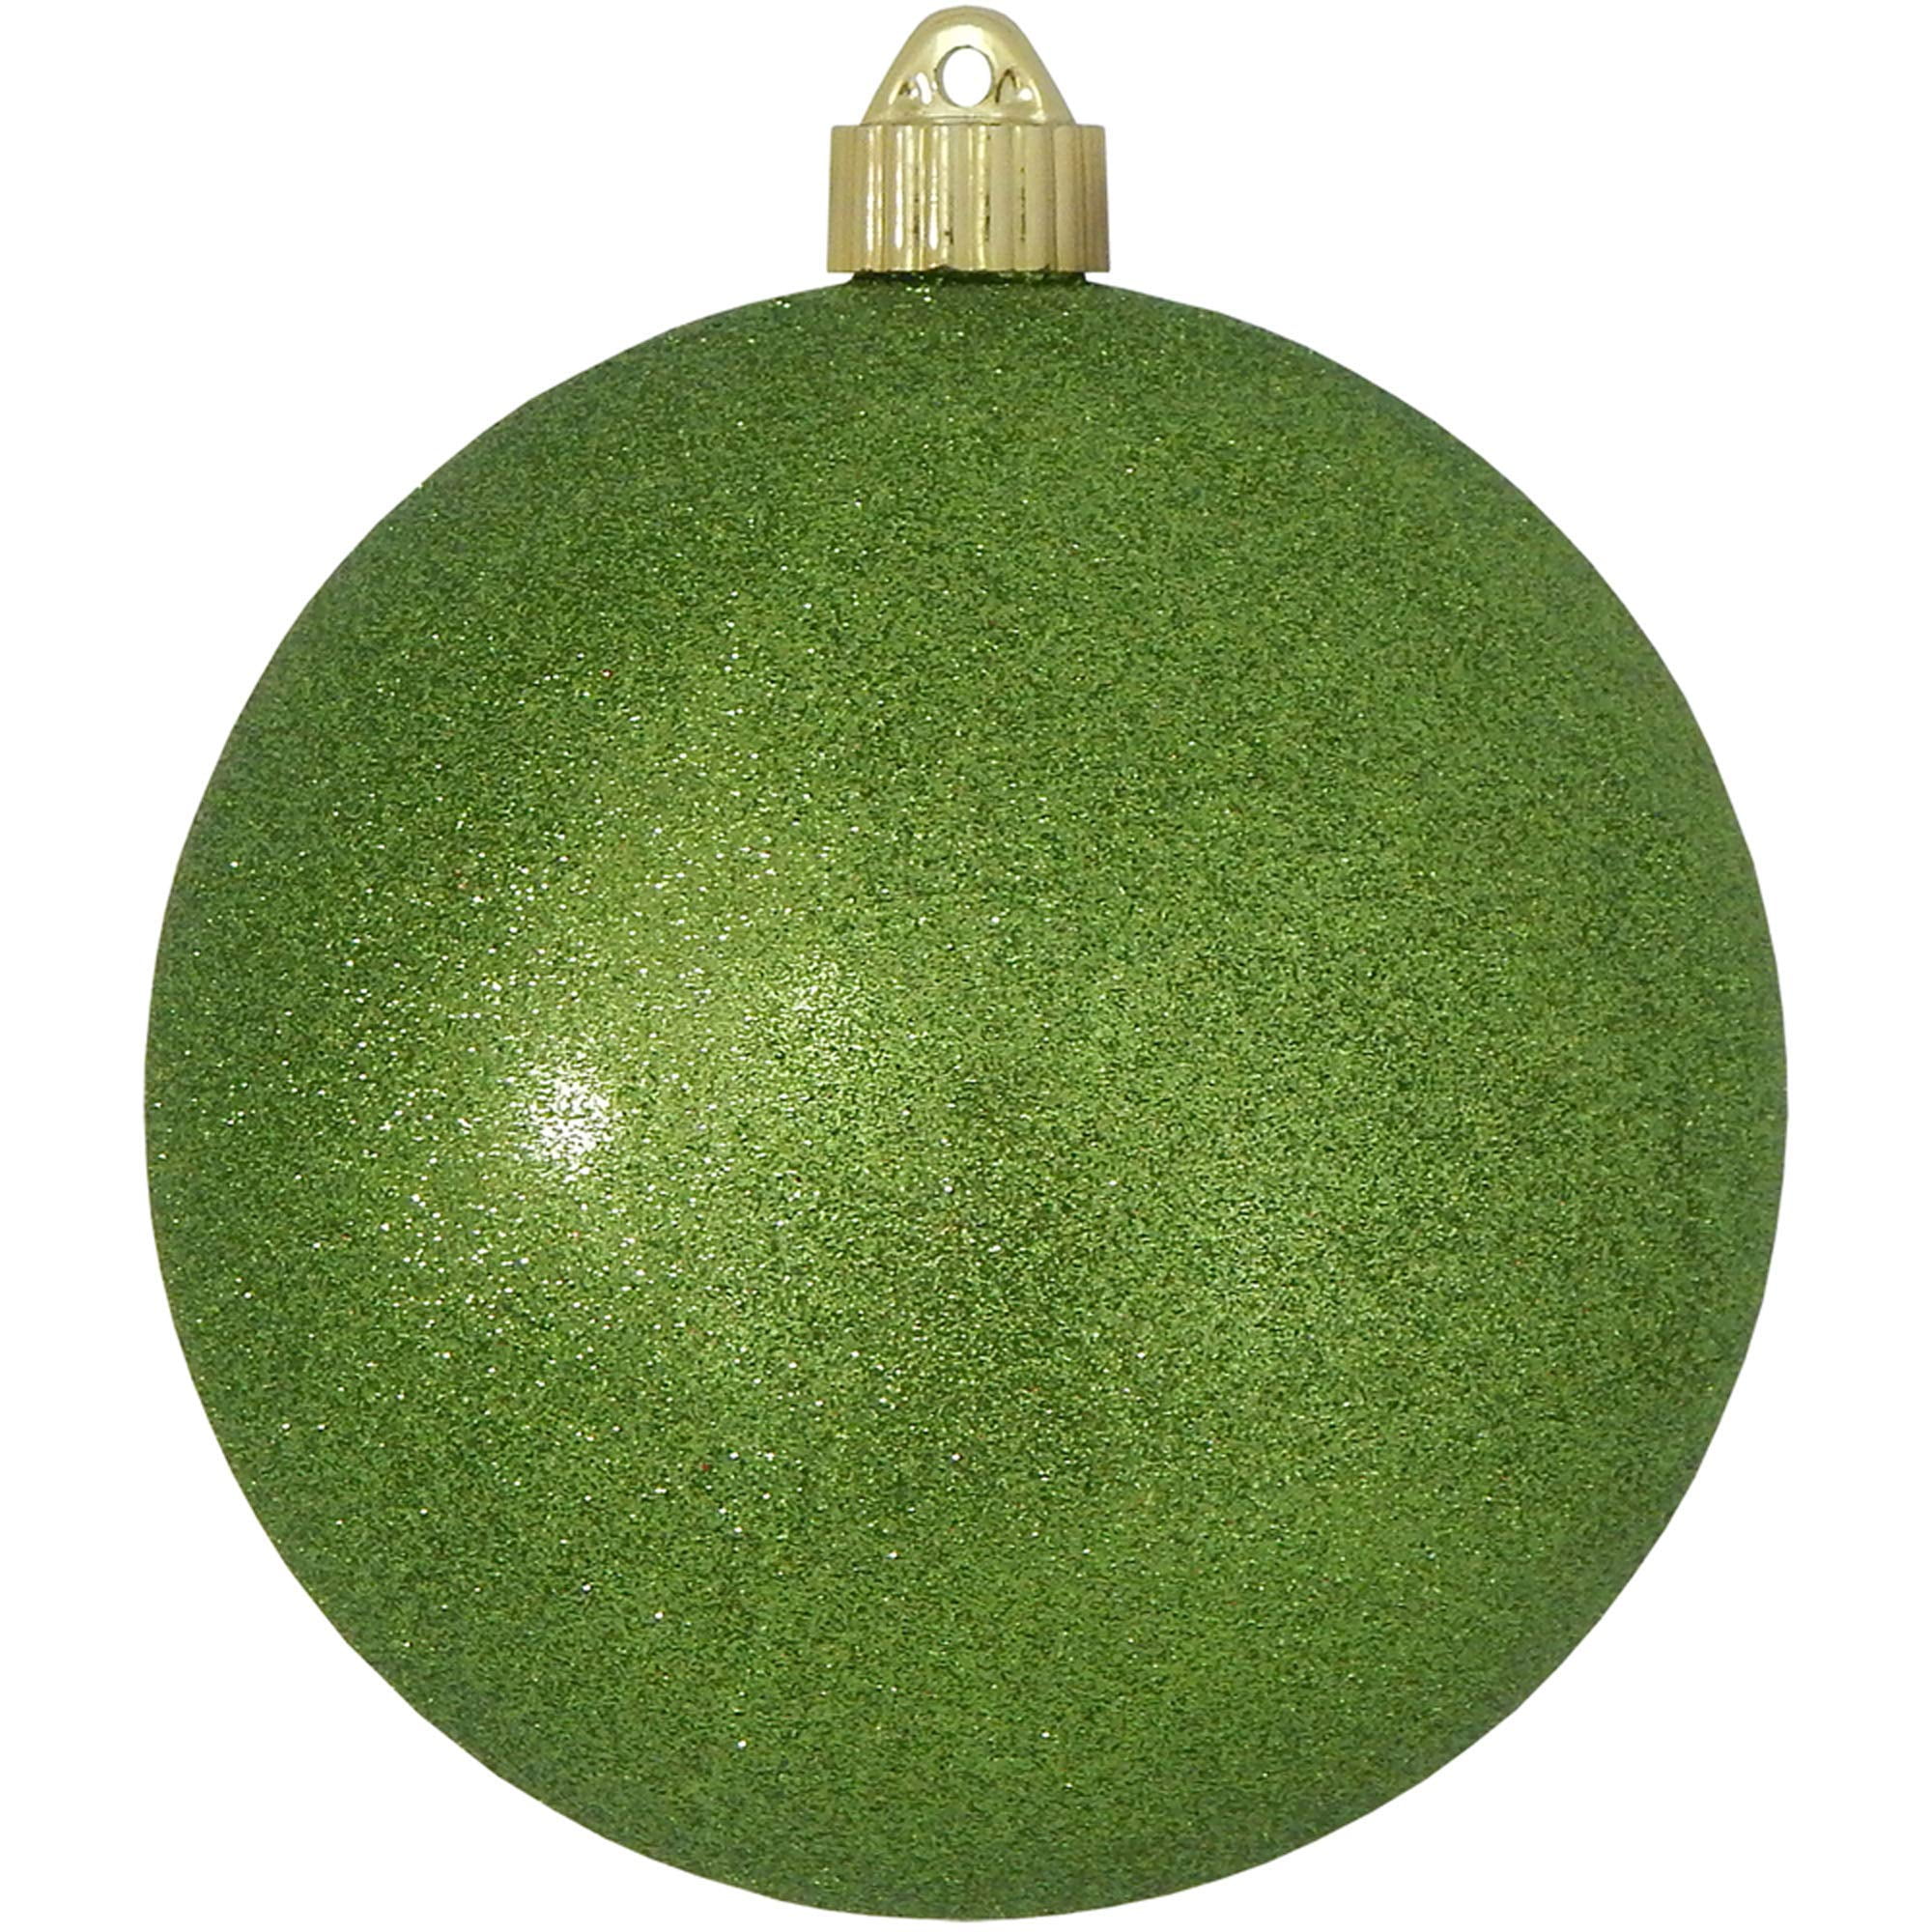 Fir green glitter clay beads 4-8 mm, Bag of 200 ml, 100g approximately, for  a natural Christmas decoration